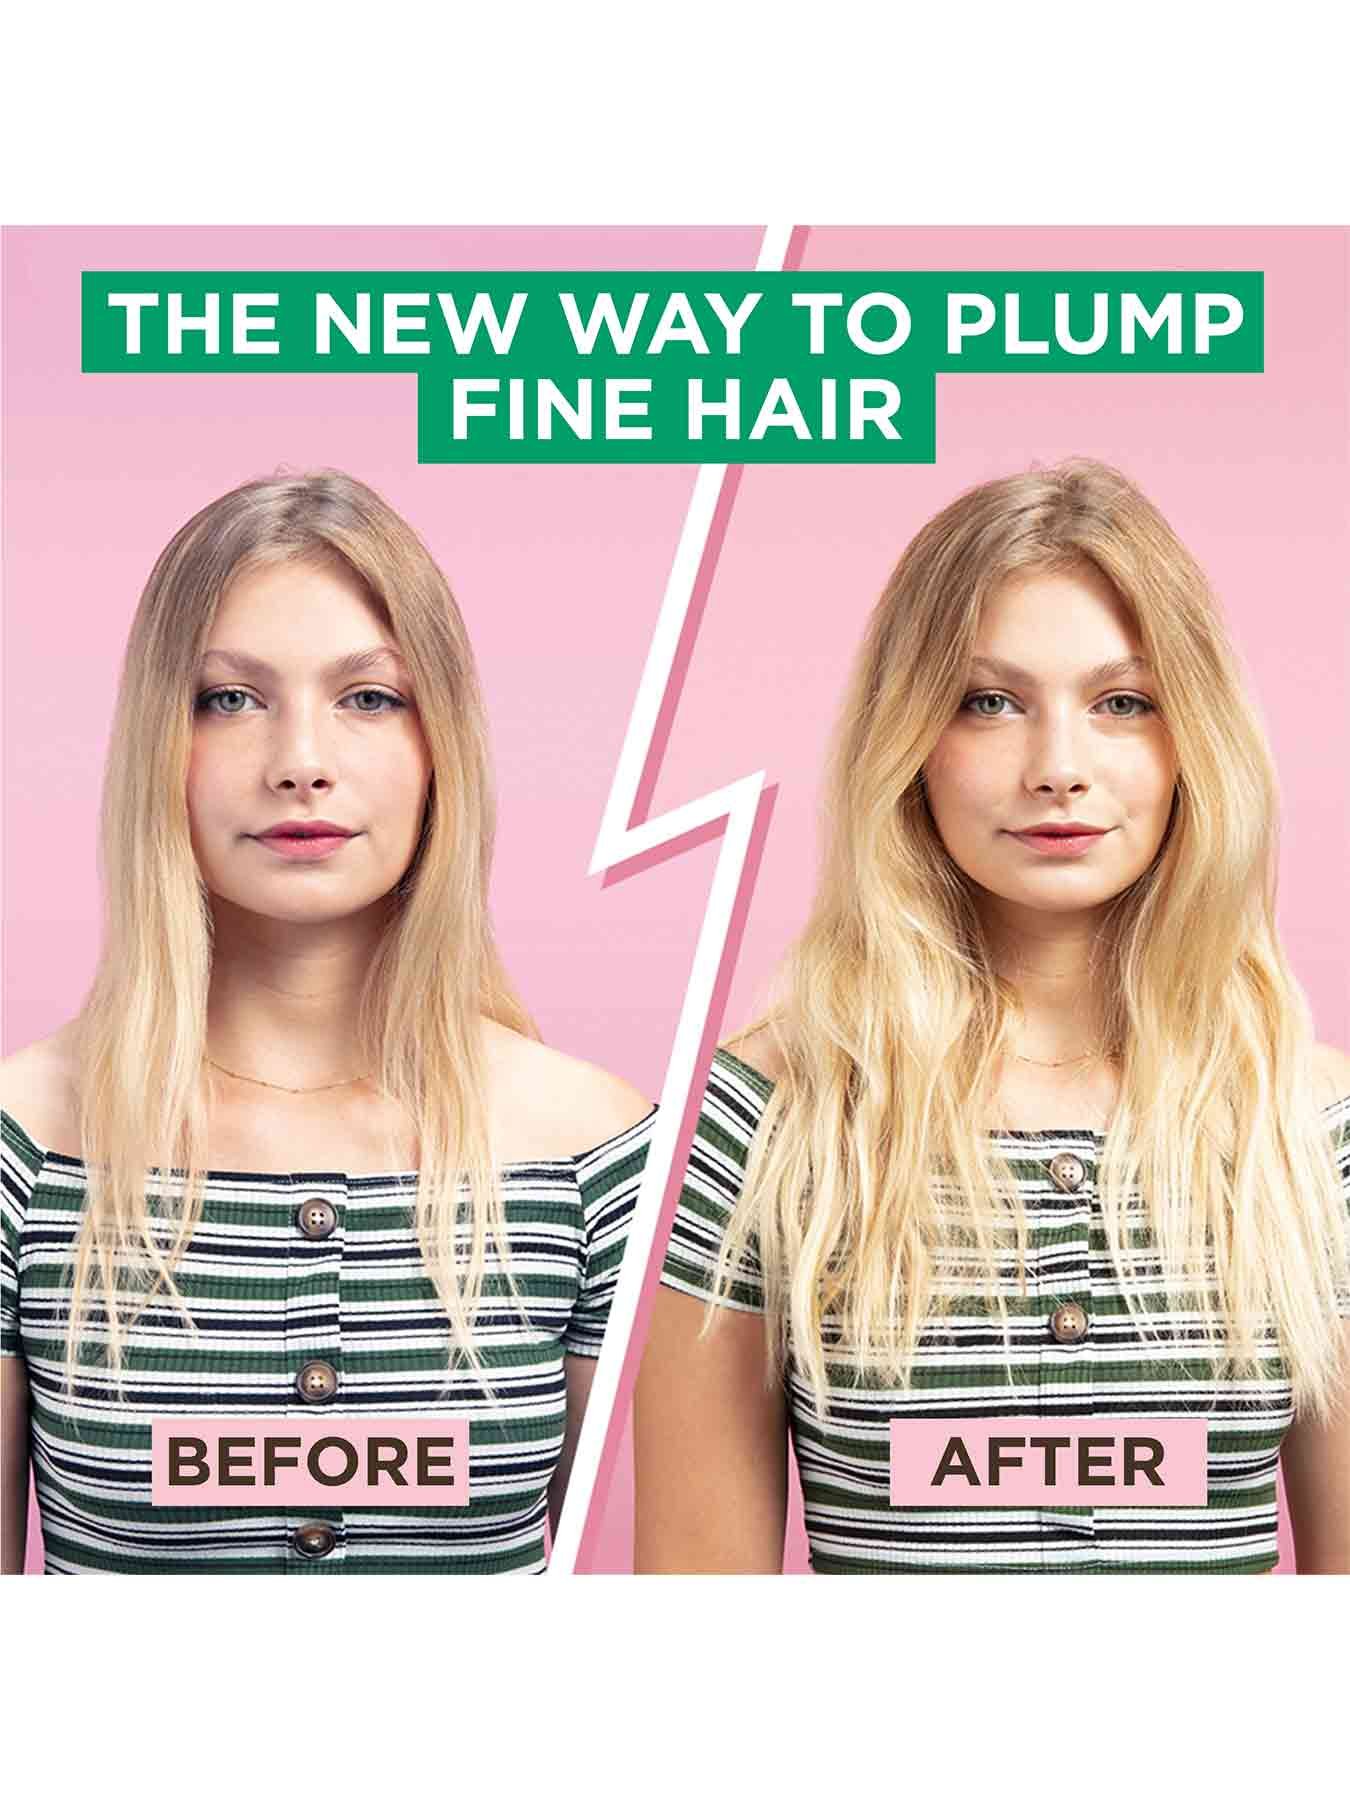 Hair Food Shampoo model showing before and after plumped hair 